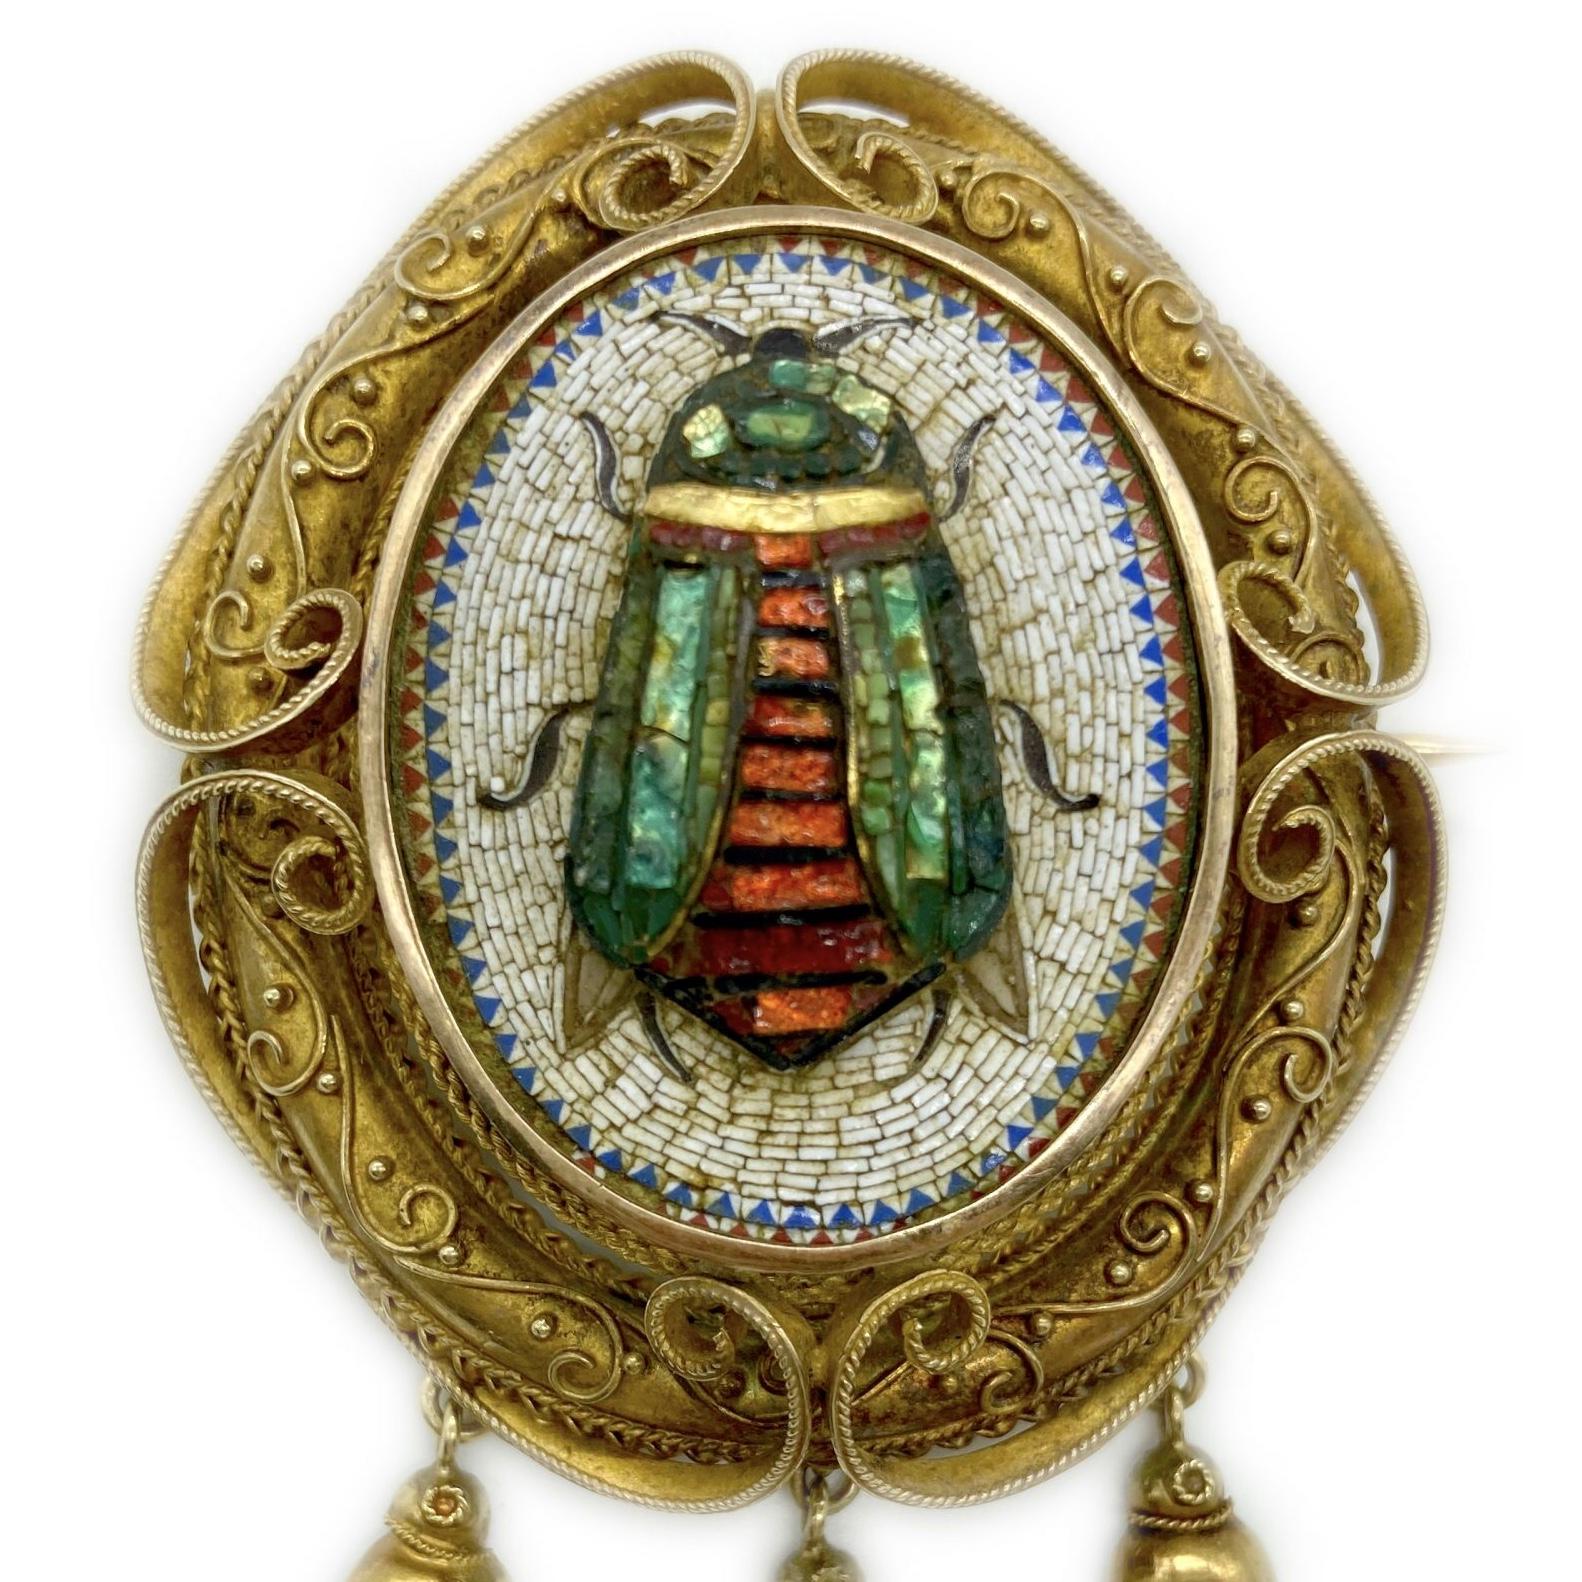 An antique yellow gold and micromosaic pendant-brooch depicting a scarab, which symbolized immortality and rebirth in Ancient Egypt. The granulation and goldwork is in the Egyptian revival style, inspired by the archaeological finds of the late